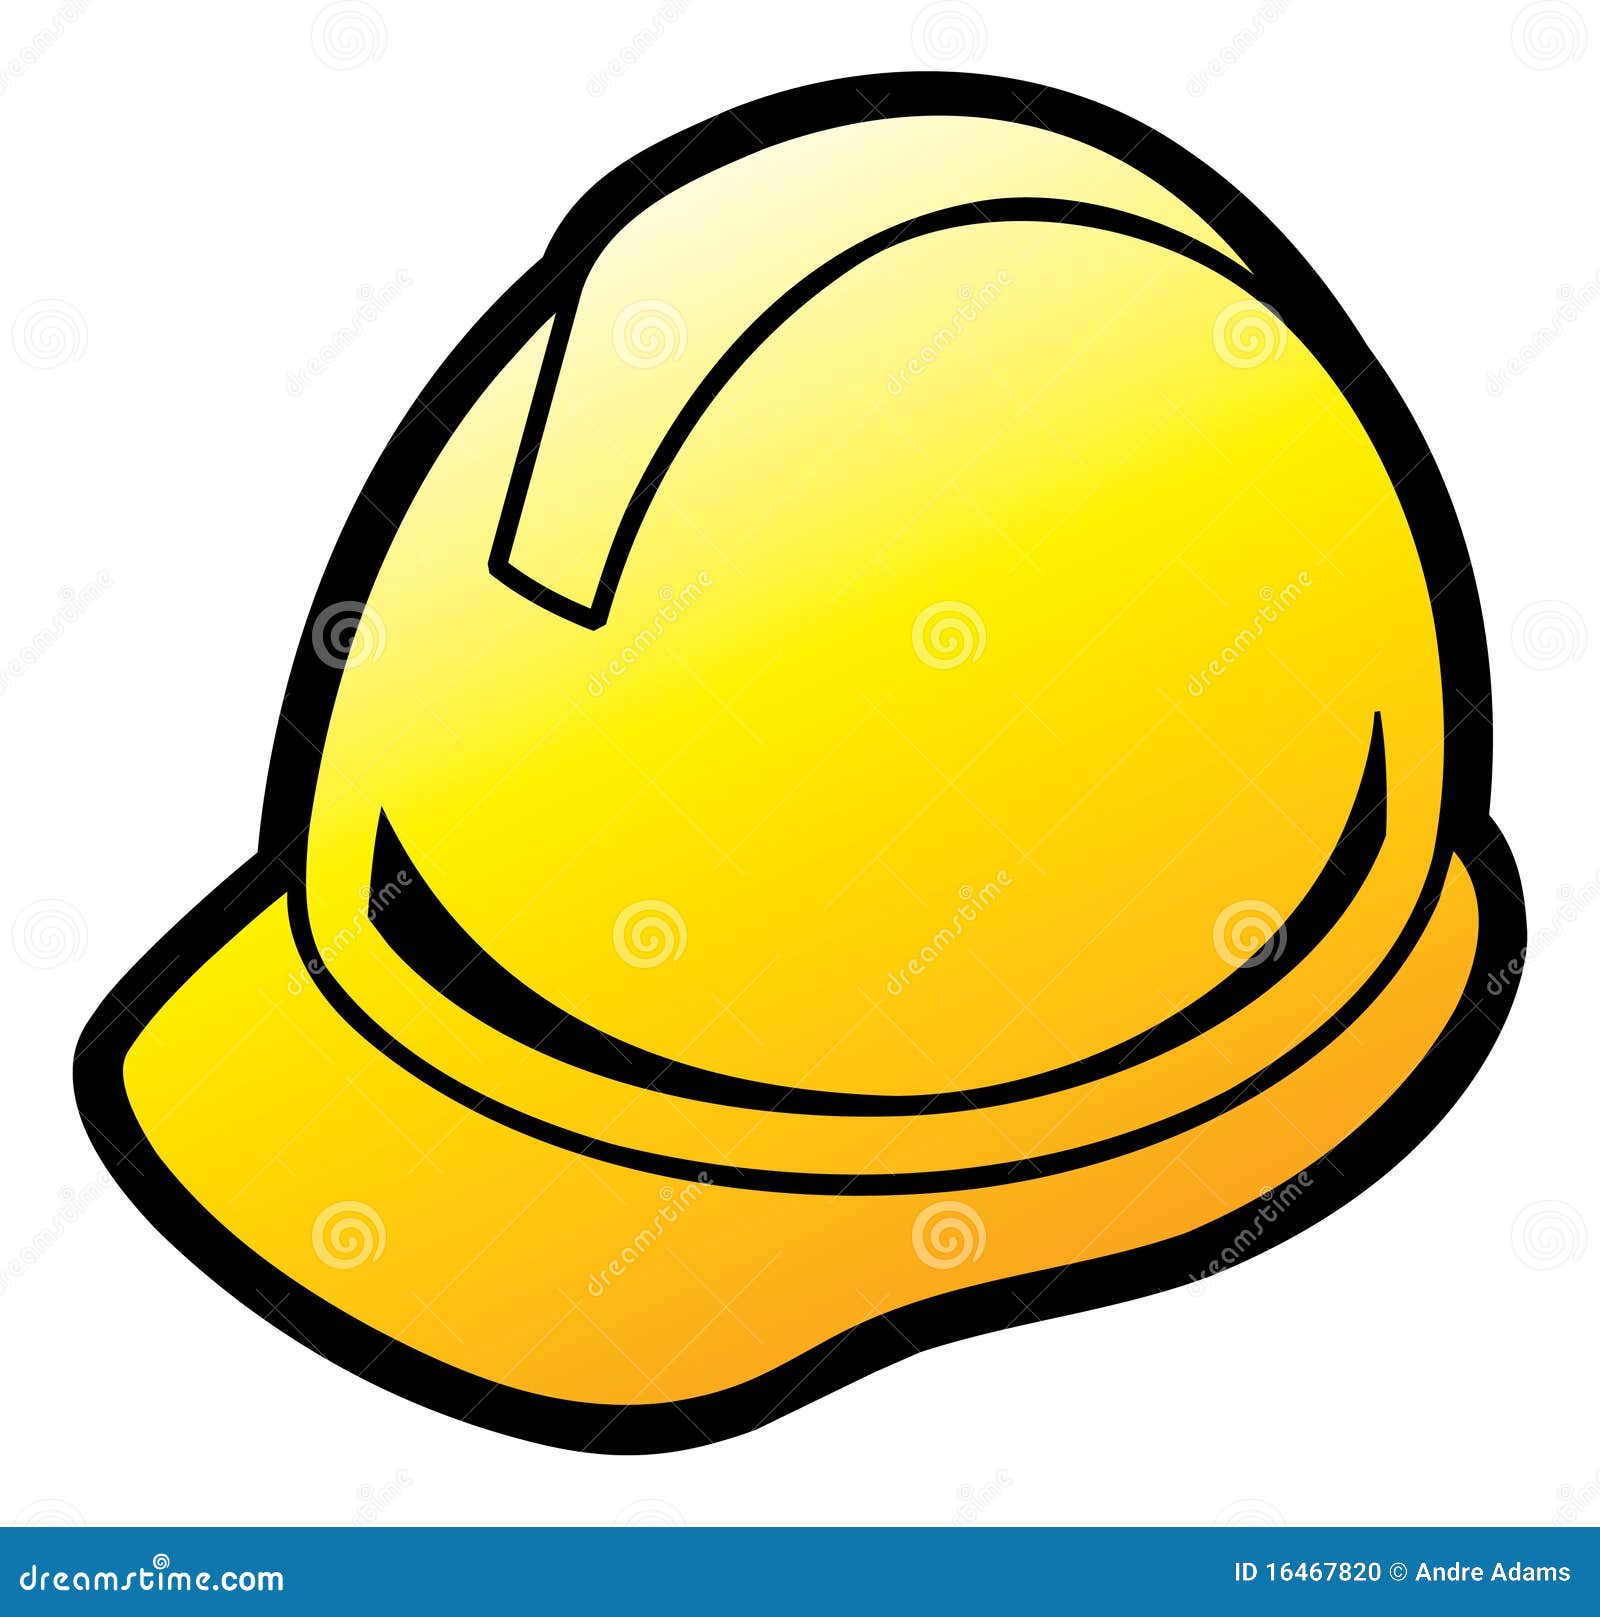 construction worker hat clipart - photo #28